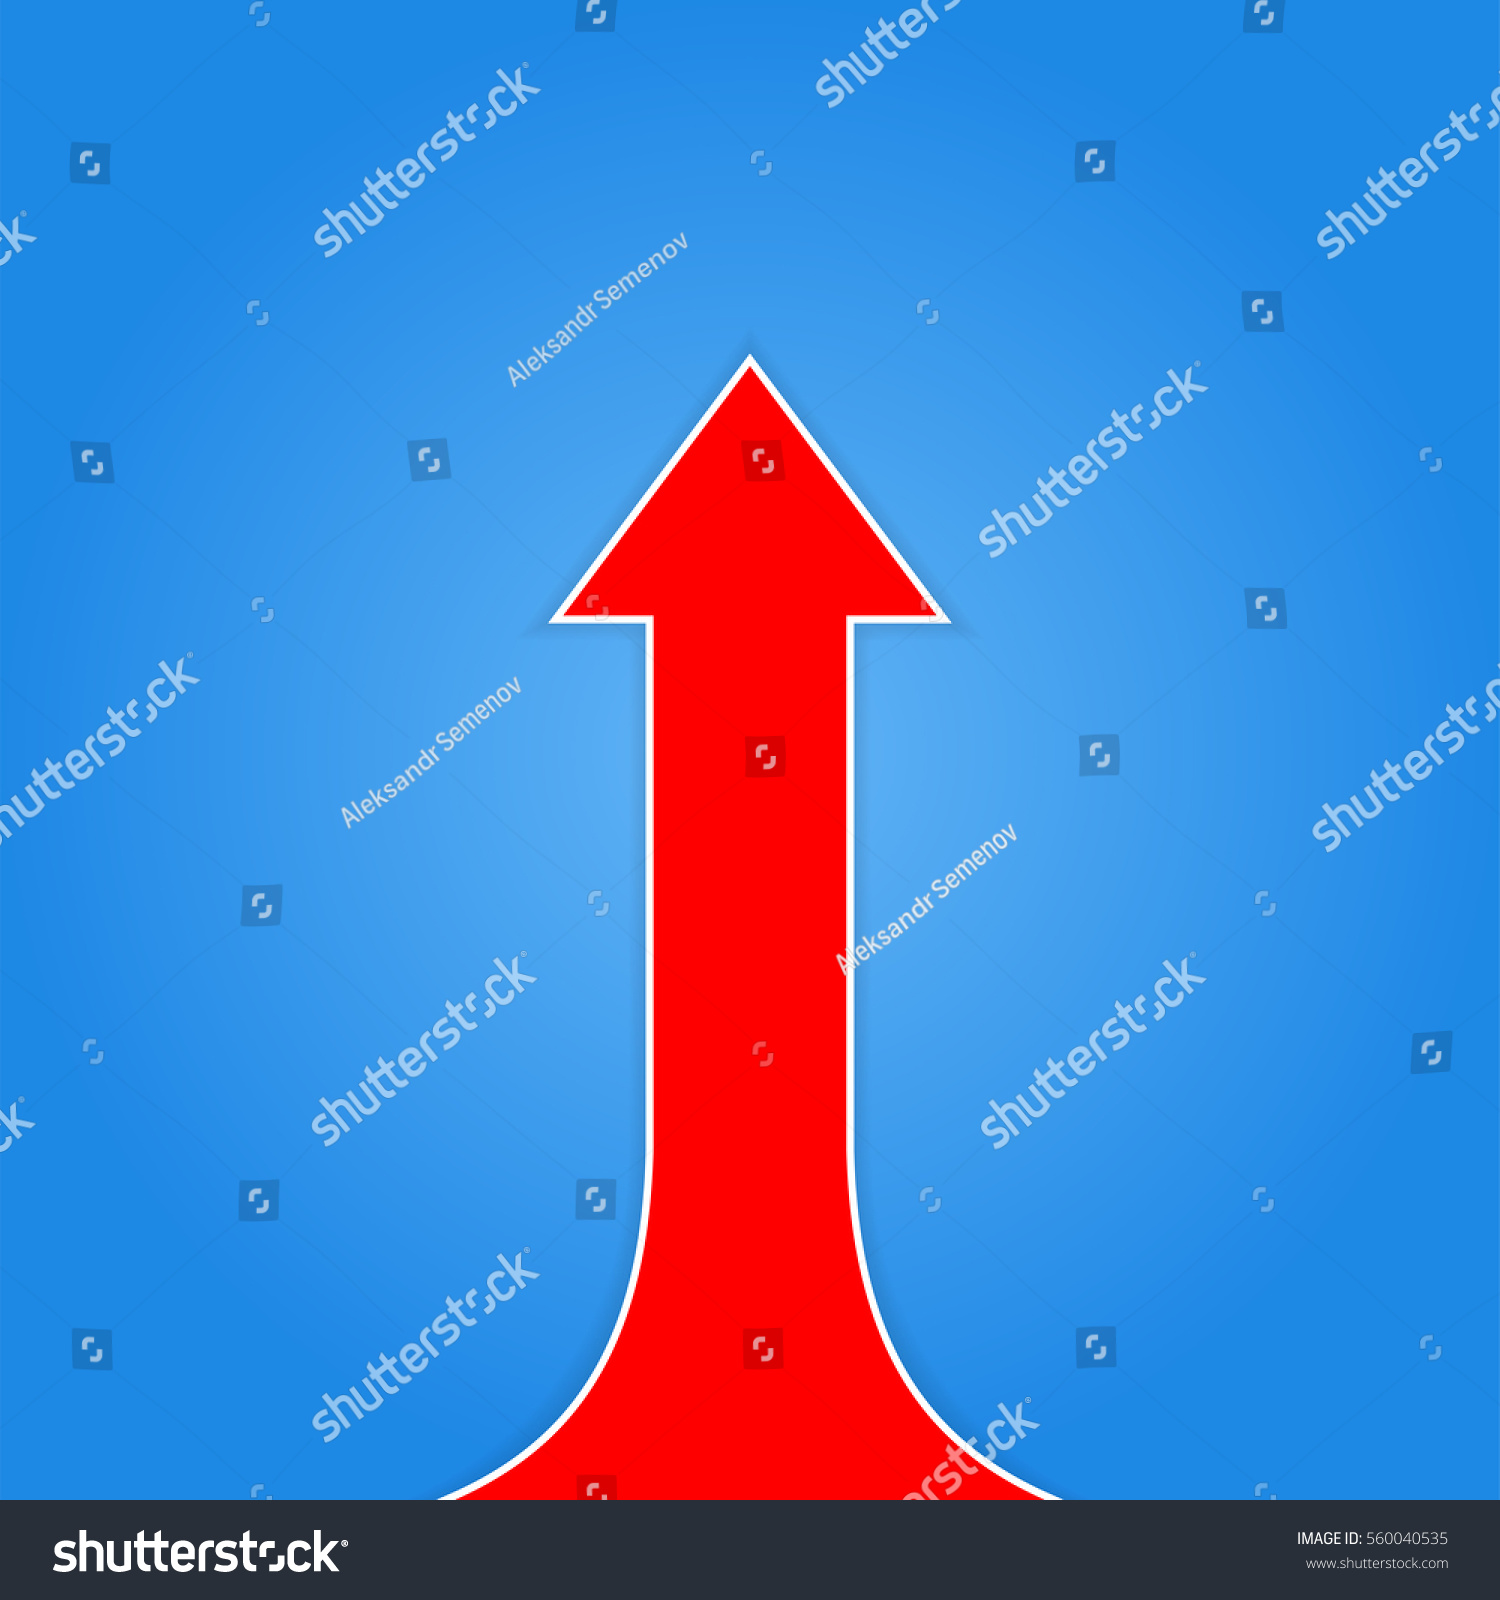 Arrows Business Growth Vector Infographic Illustration Stock Vector Royalty Free 560040535 1752